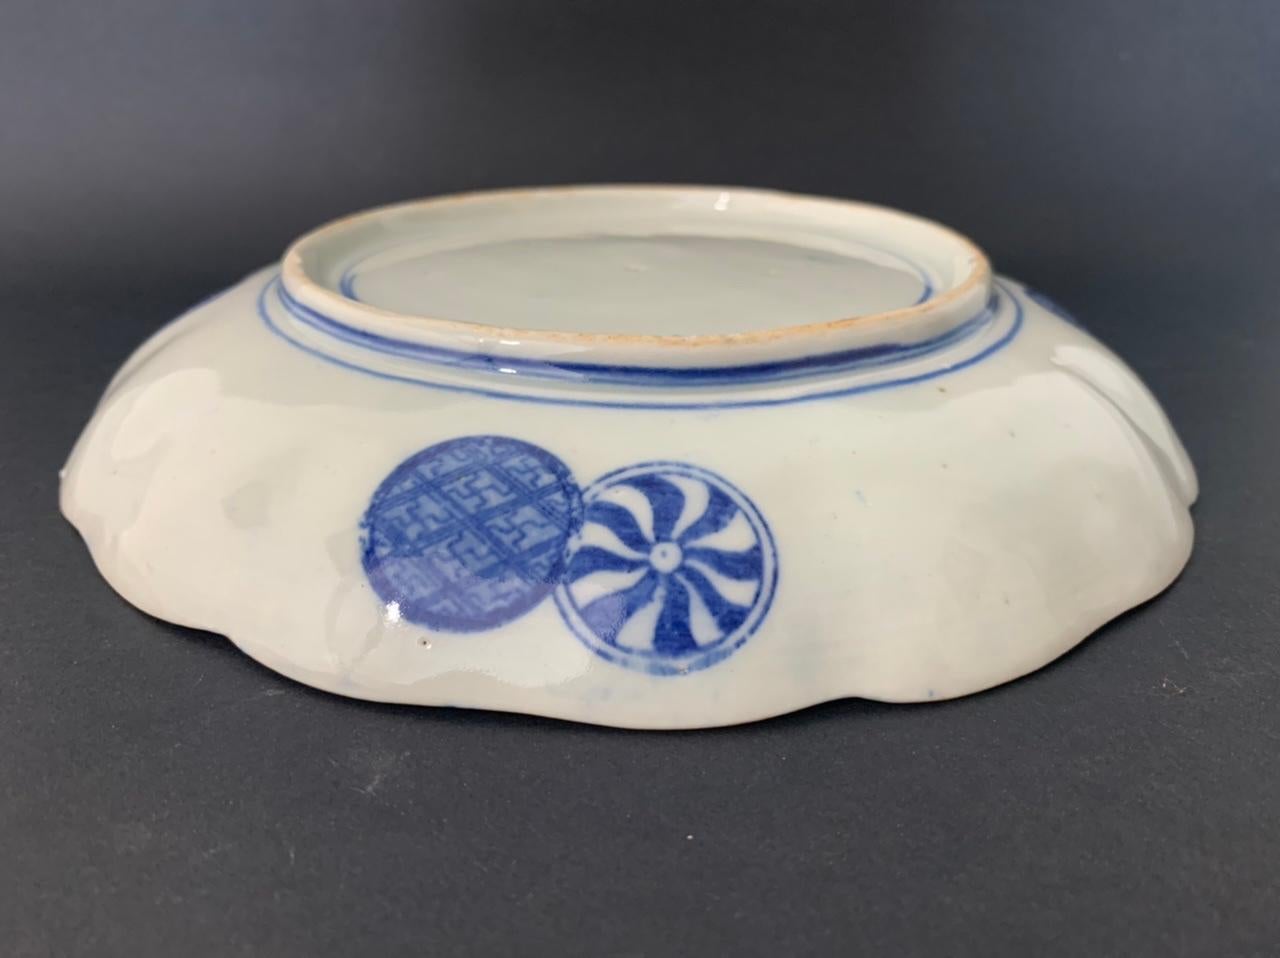 Porcelain Chinese Soup Plate Inspired by the Blue Family India Compagny, Mid 19th Century For Sale